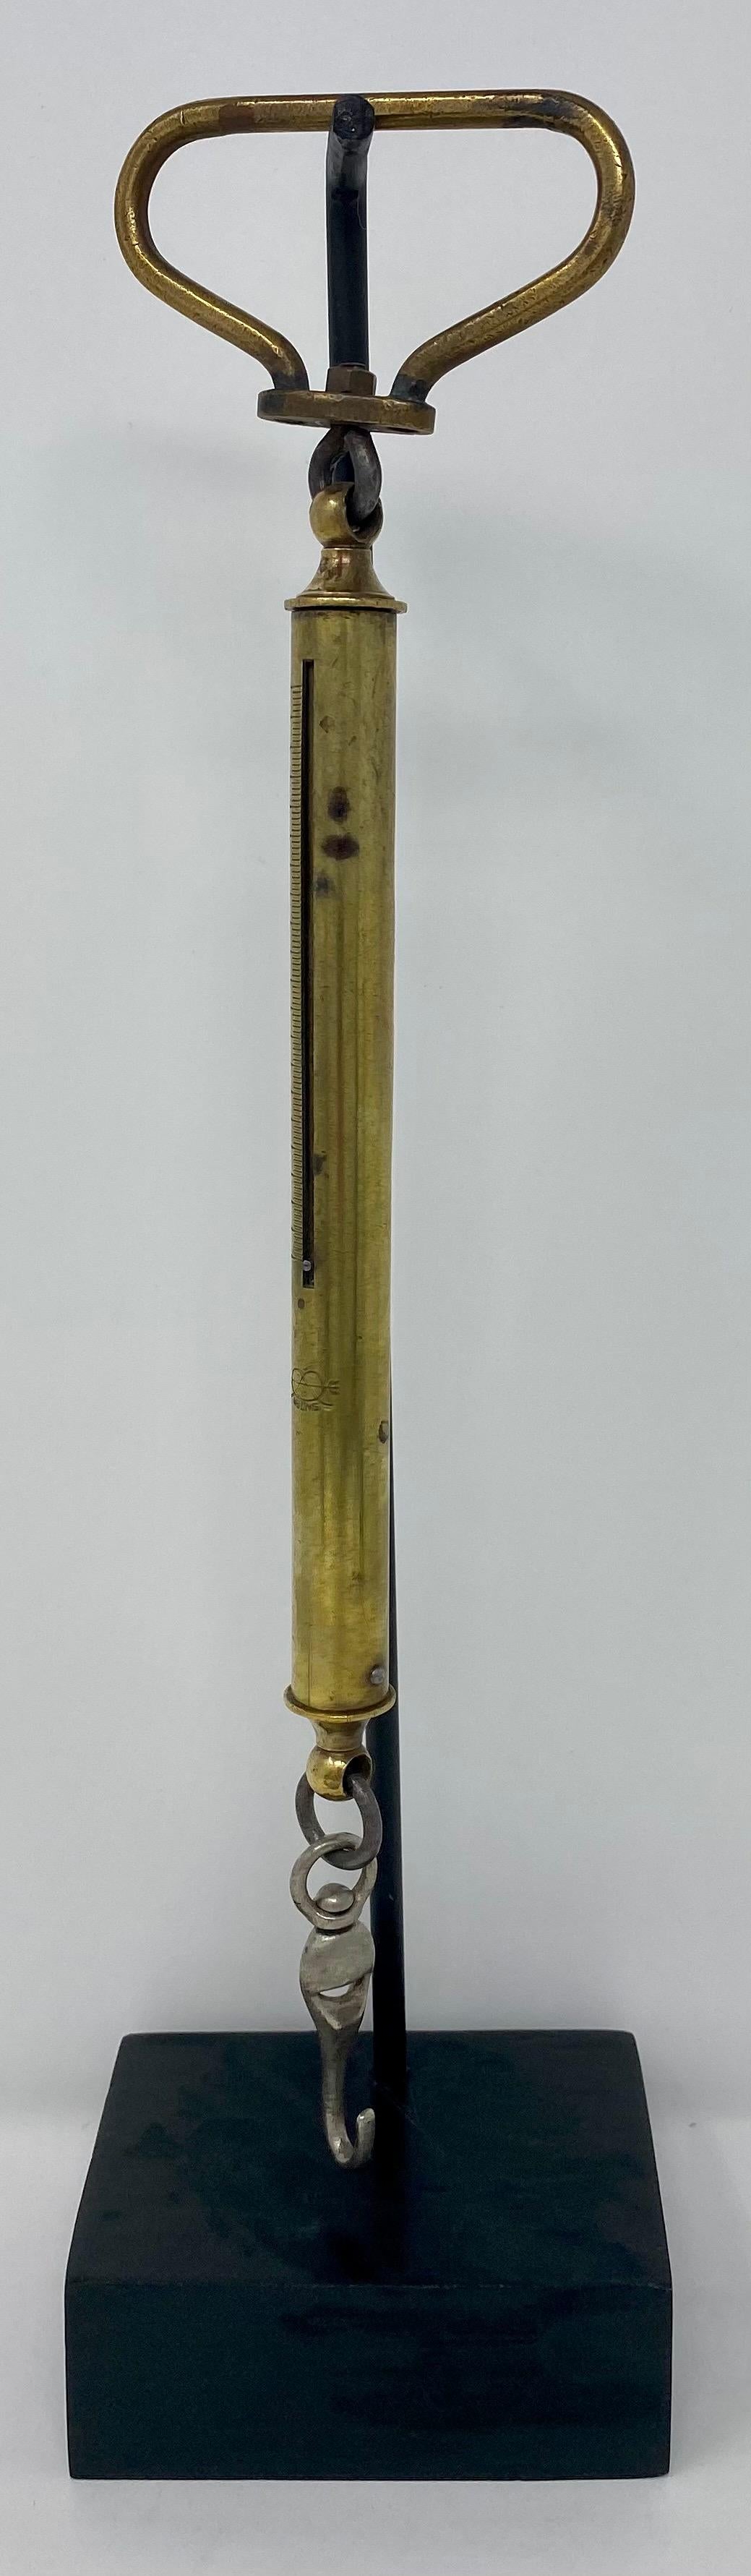 Antique English spring balance scale made by 